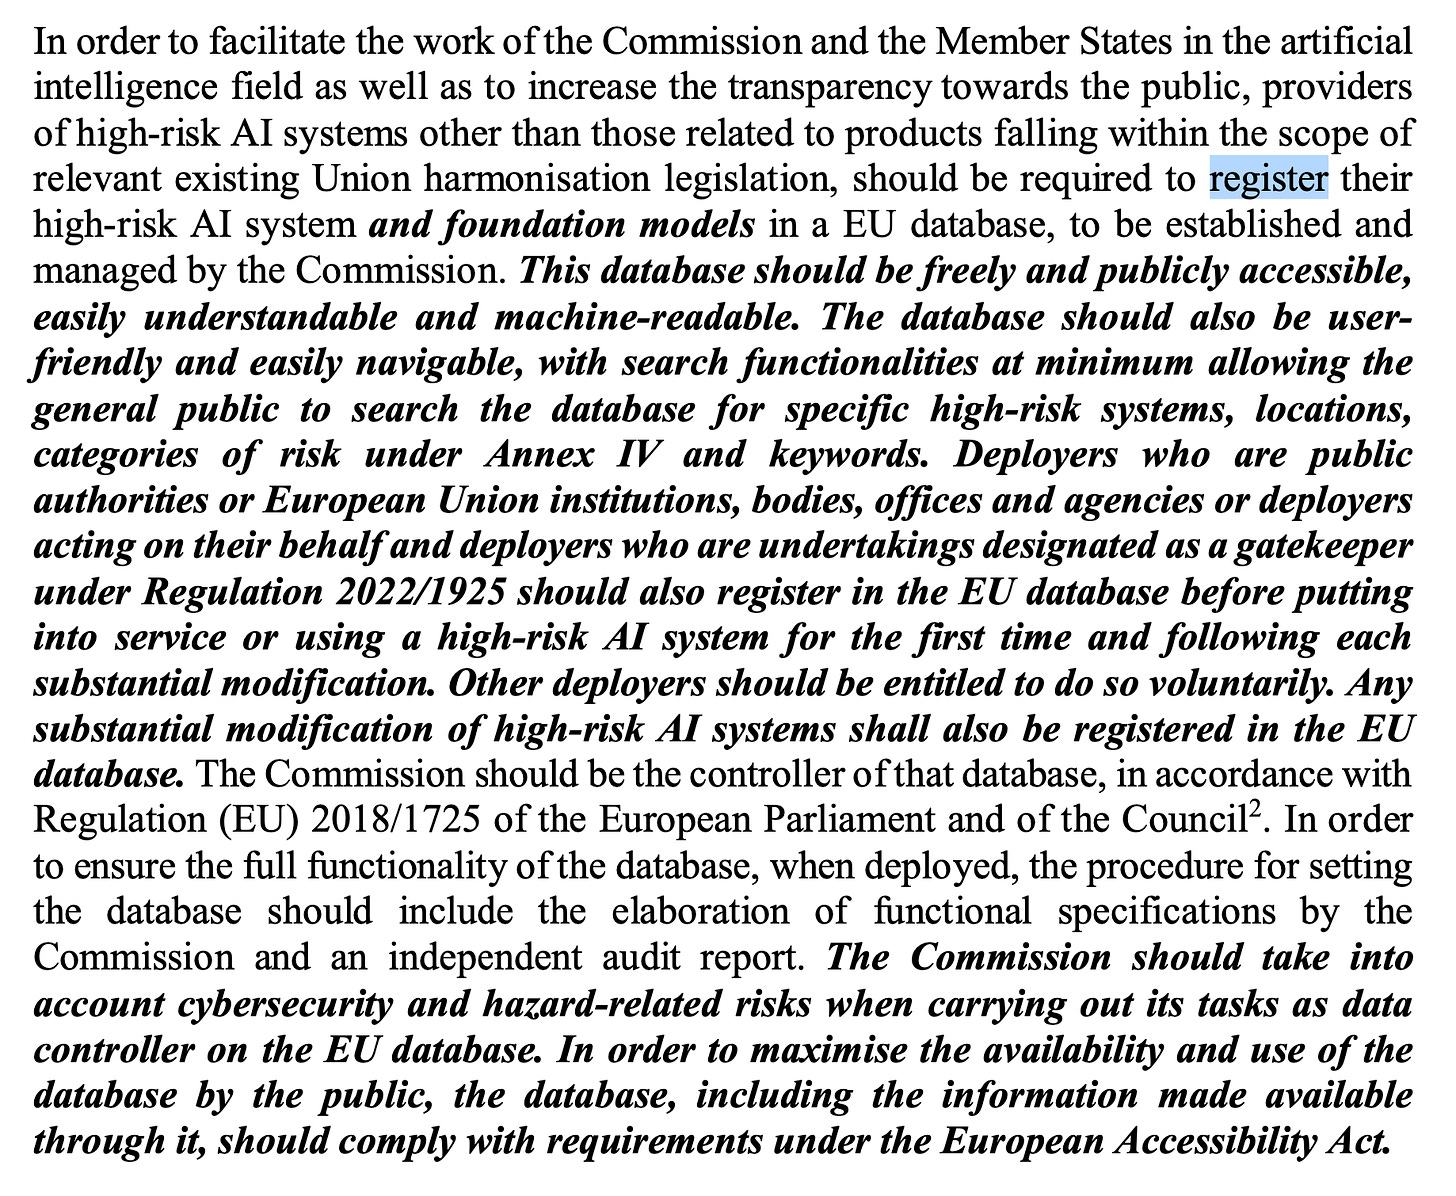 In order to facilitate the work of the Commission and the Member States in the artificial intelligence field as well as to increase the transparency towards the public, providers of high-risk AI systems other than those related to products falling within the scope of relevant existing Union harmonisation legislation, should be required to register their high-risk AI system and foundation models in a EU database, to be established and managed by the Commission. This database should be freely and publicly accessible, easily understandable and machine-readable. The database should also be user- friendly and easily navigable, with search functionalities at minimum allowing the general public to search the database for specific high-risk systems, locations, categories of risk under Annex IV and keywords. Deployers who are public authorities or European Union institutions, bodies, offices and agencies or deployers acting on their behalf and deployers who are undertakings designated as a gate